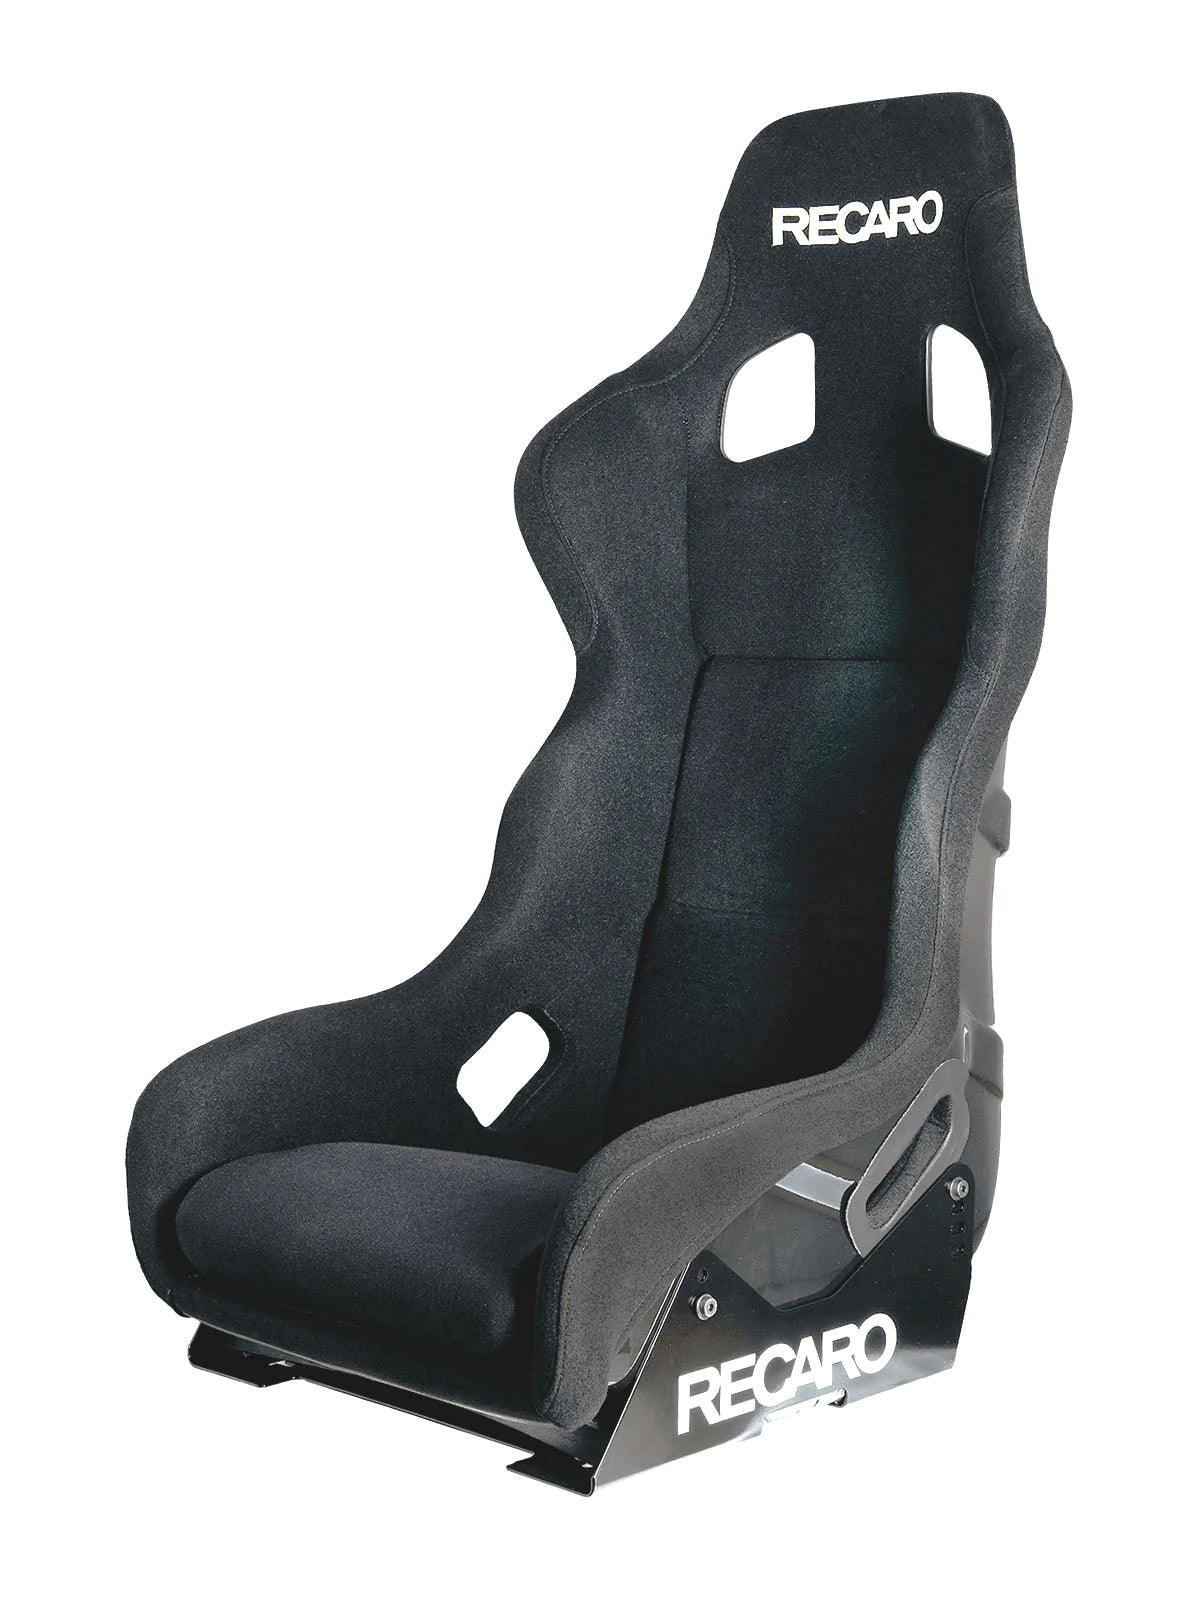 Recaro Pole Position N.G. FIA Approved Seat